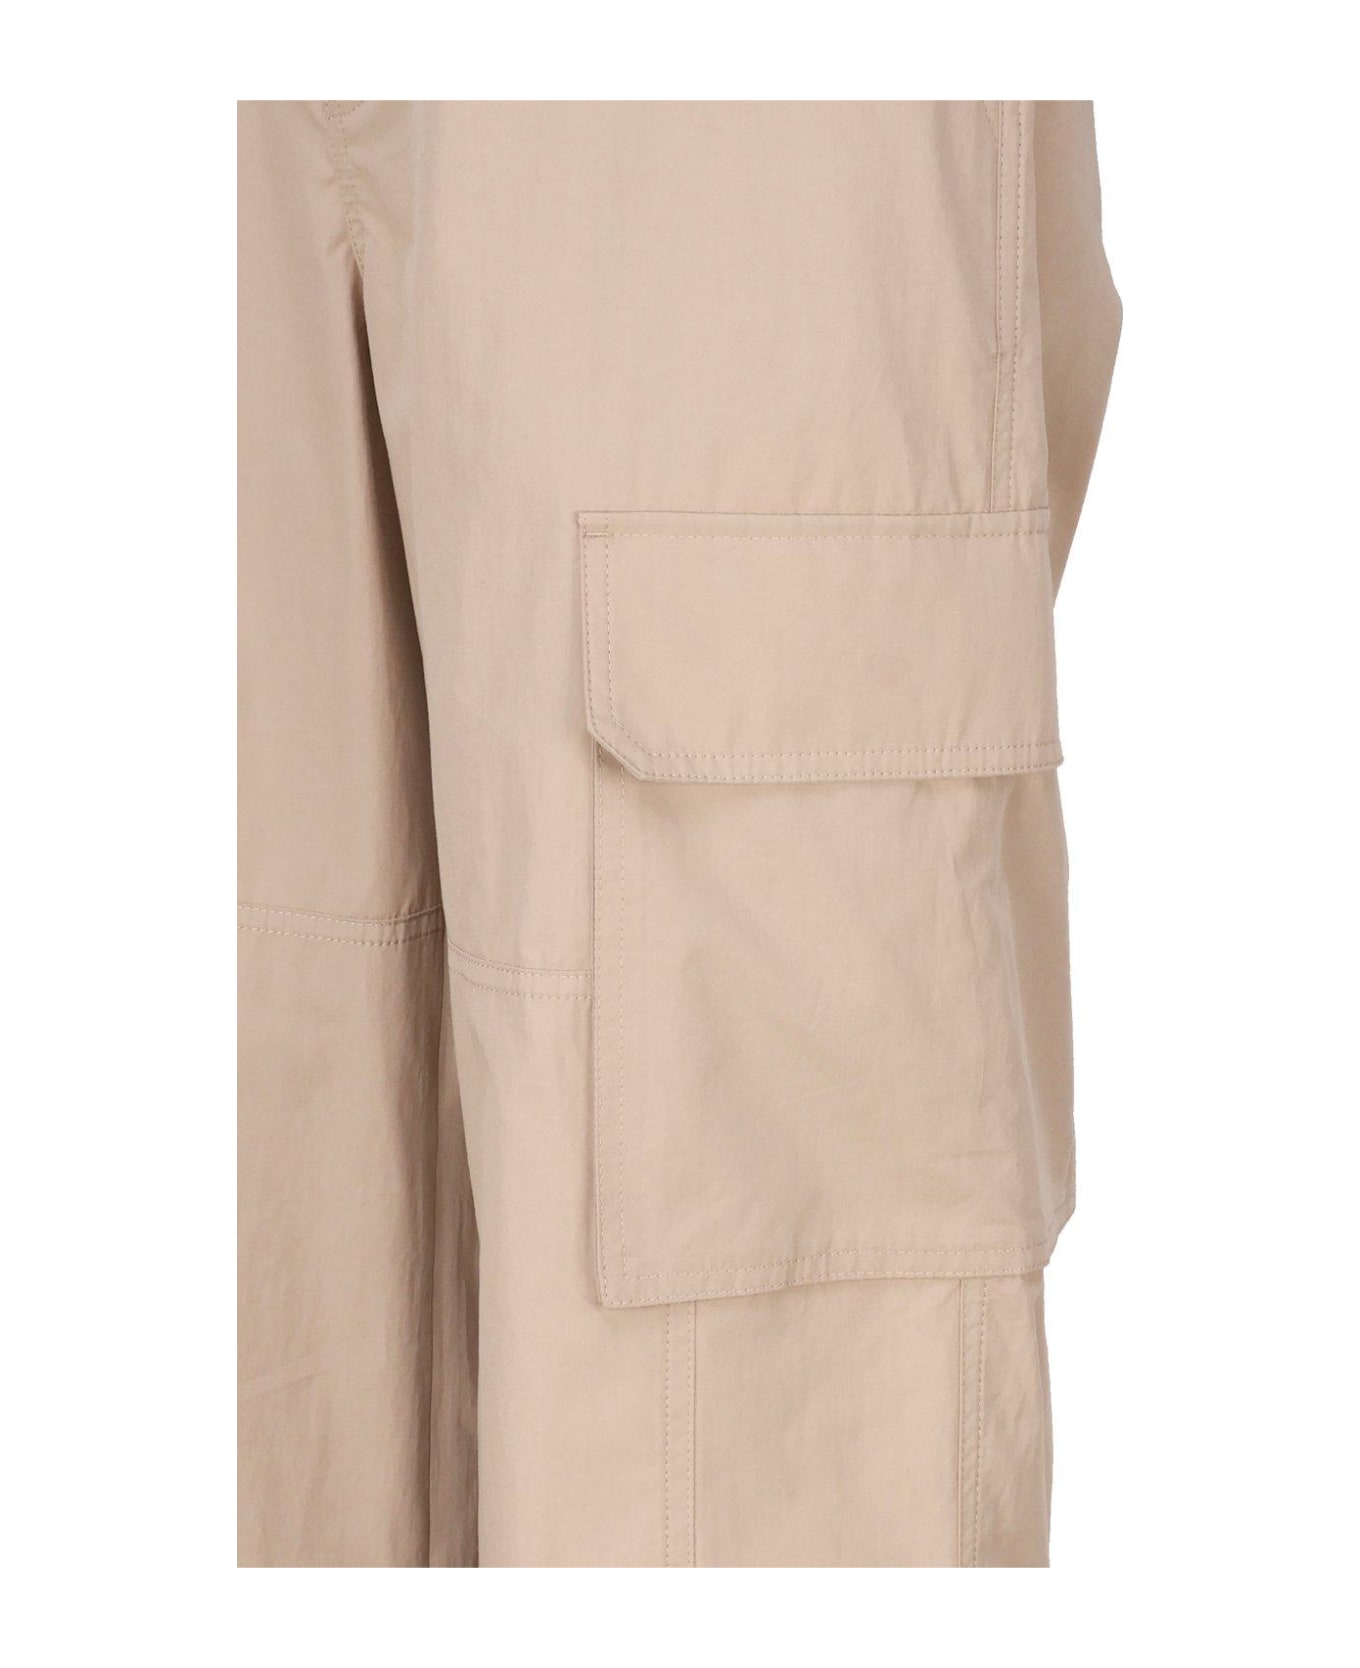 Valentino Button Detailed Straight Leg Pants - Beige ボトムス